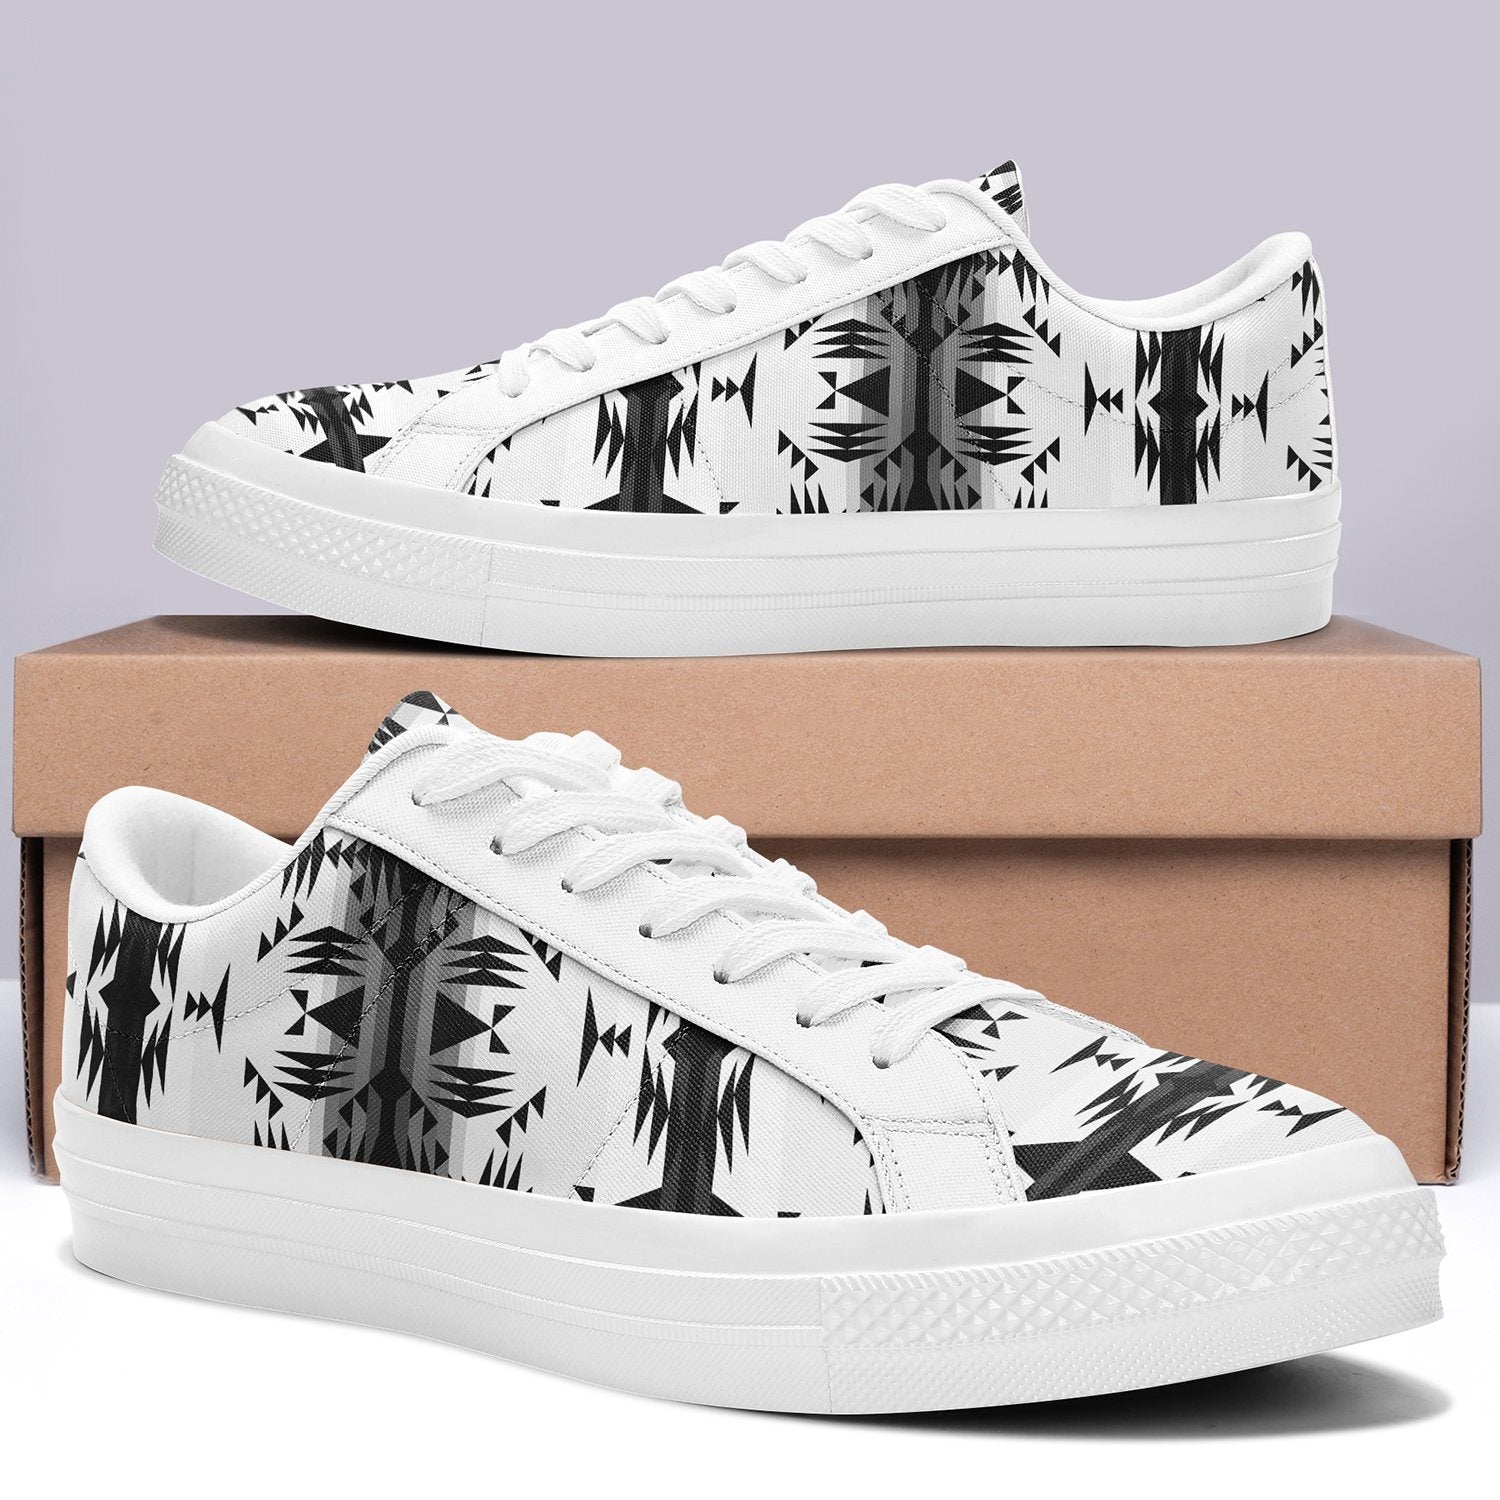 Between the Mountains White and Black Aapisi Low Top Canvas Shoes White Sole 49 Dzine 